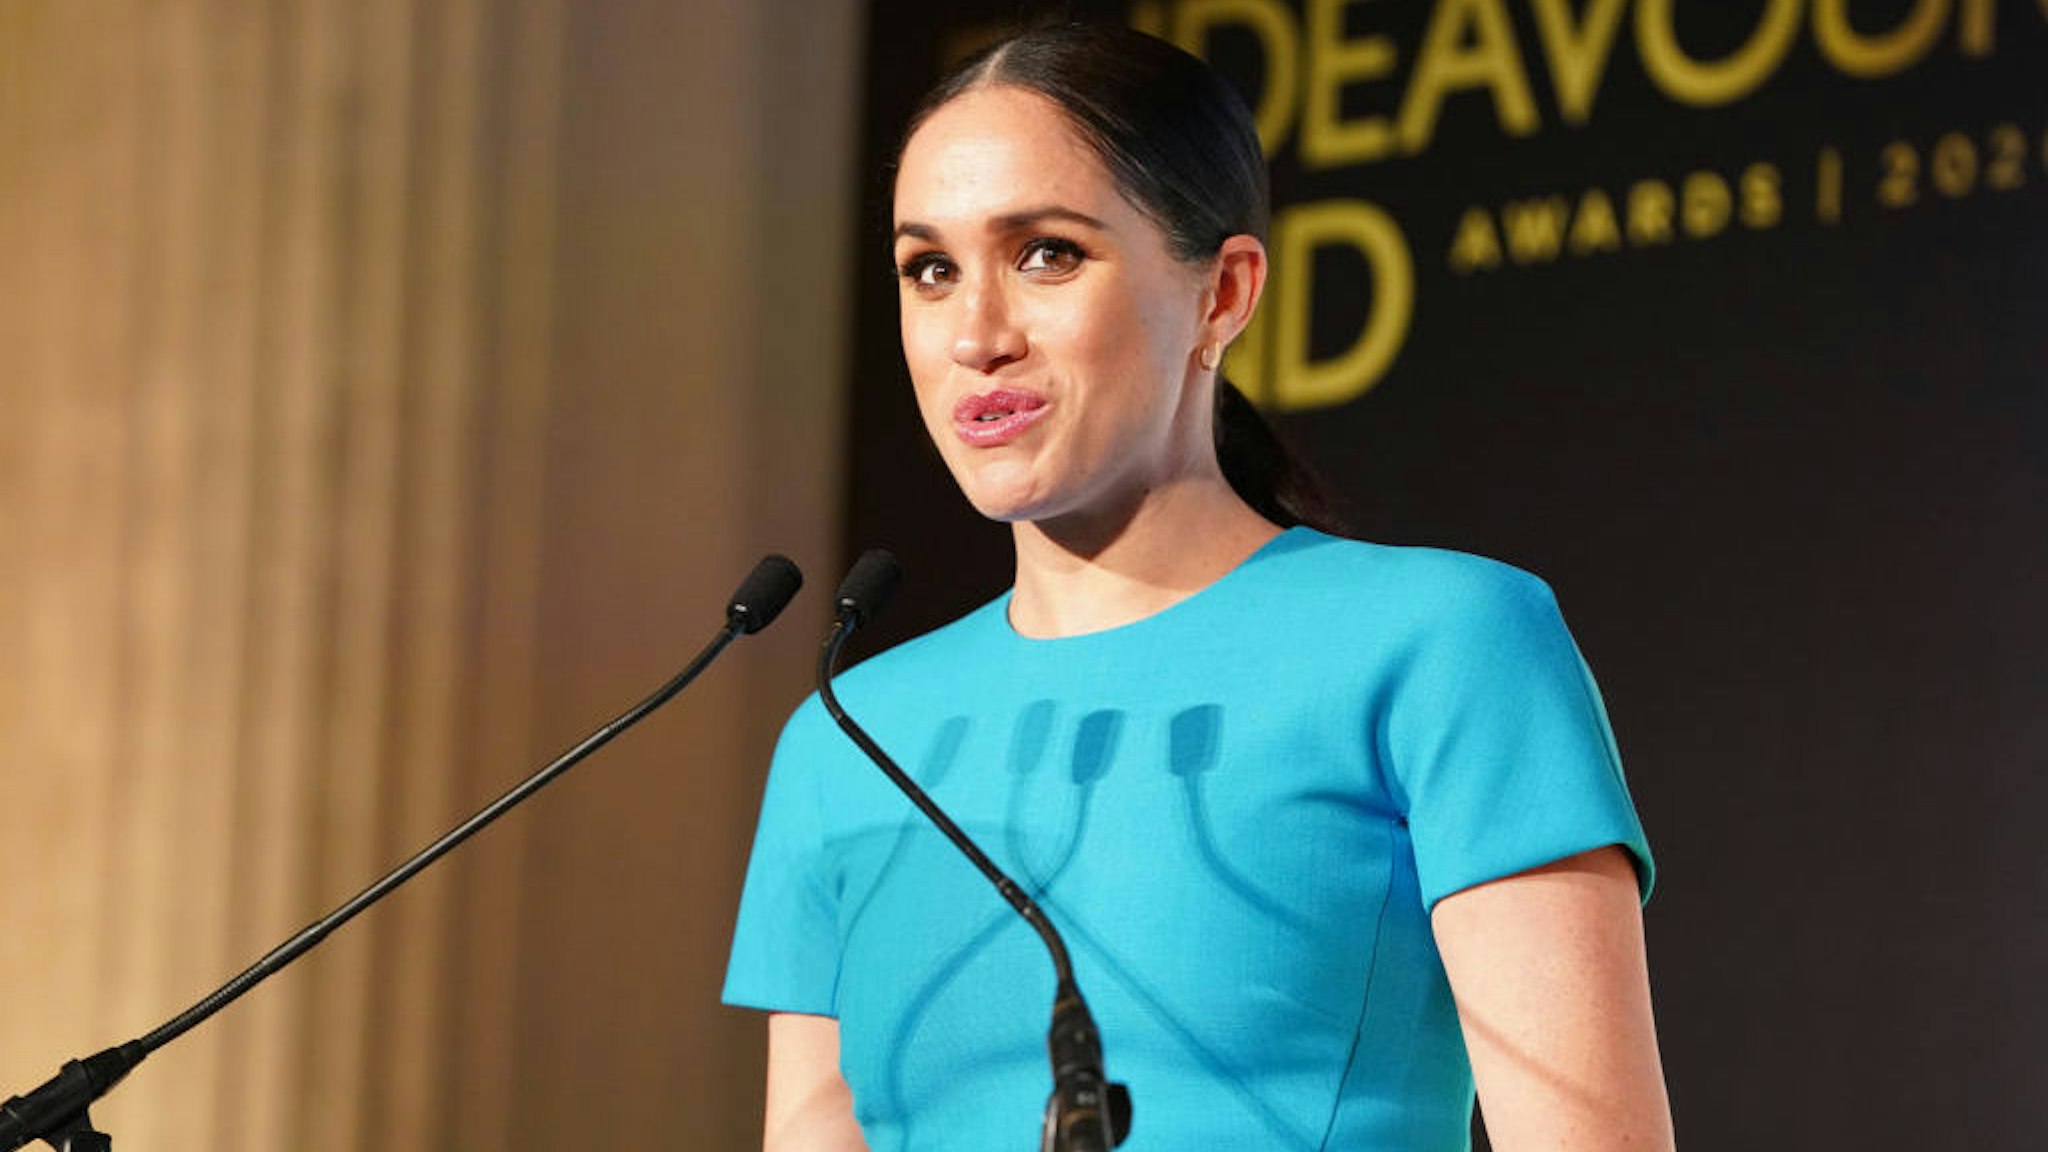 Britain's Meghan, Duchess of Sussex delivers a speech during the Endeavour Fund Awards at Mansion House in London on March 5, 2020. - The Endeavour Fund helps servicemen and women have the opportunity to rediscover their self-belief and fighting spirit through physical challenges. (Photo by Paul Edwards / POOL / AFP) (Photo by PAUL EDWARDS/POOL/AFP via Getty Images)